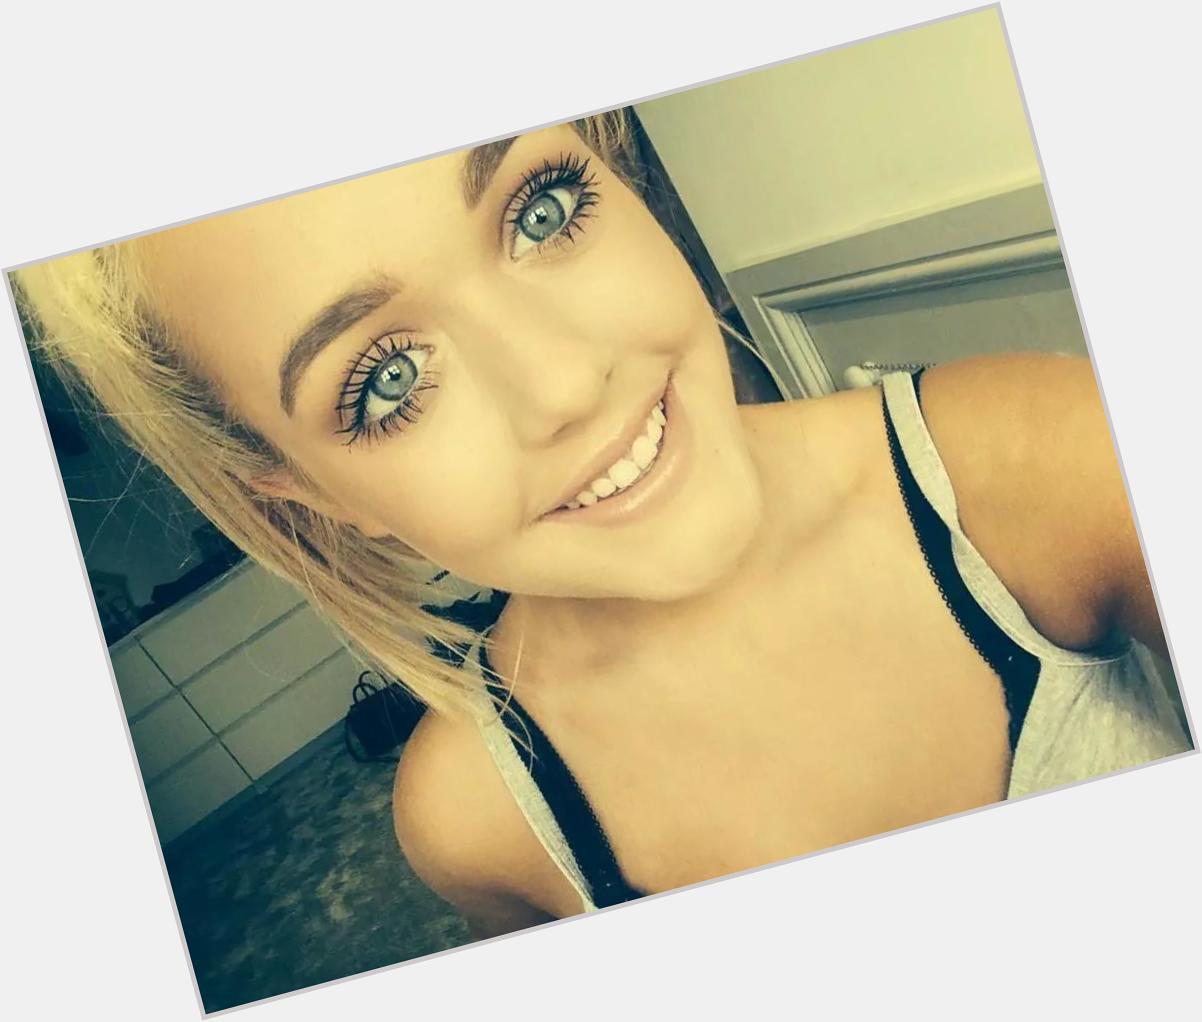  Happy Birthday To You Lottie  ((Tomlinson eyeees   )) Love you^^ 